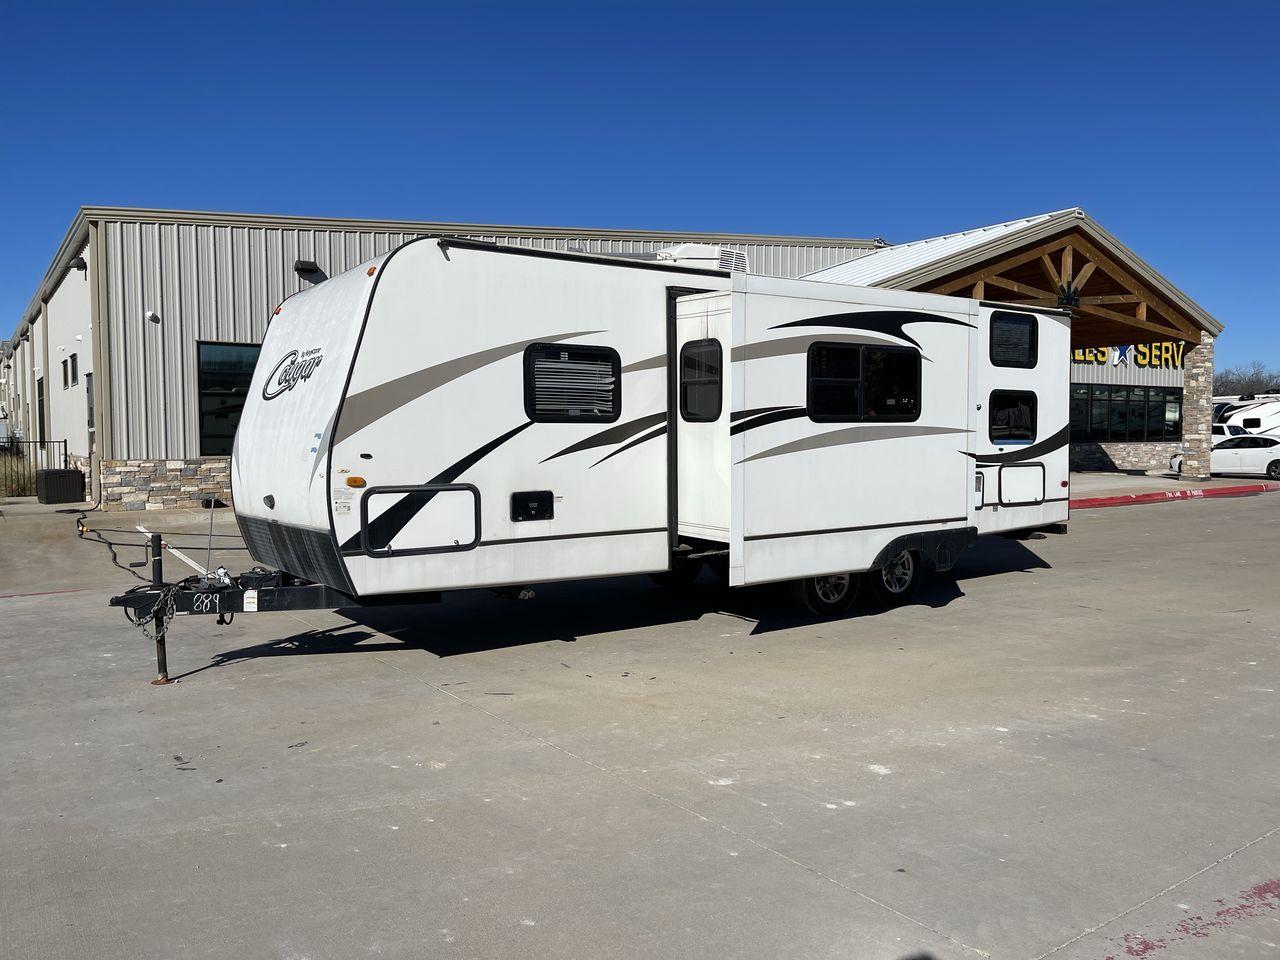 2014 WHITE KEYSTONE COUGAR MDL 260RB (4YDT26027EV) , Length: 29.67 ft. | Dry Weight: 5,065 lbs. | Slides: 1 transmission, located at 4319 N Main St, Cleburne, TX, 76033, (817) 678-5133, 32.385960, -97.391212 - The 2014 Keystone Cougar Model 260RB travel trailer offers the ideal fusion of elegance and utility. With its roomy and welcoming interior, this well-designed RV is a great option for both long trips and weekend excursions. This travel trailer has a length of 29.8 ft and weighs 5,065 lbs. It is s - Photo #21